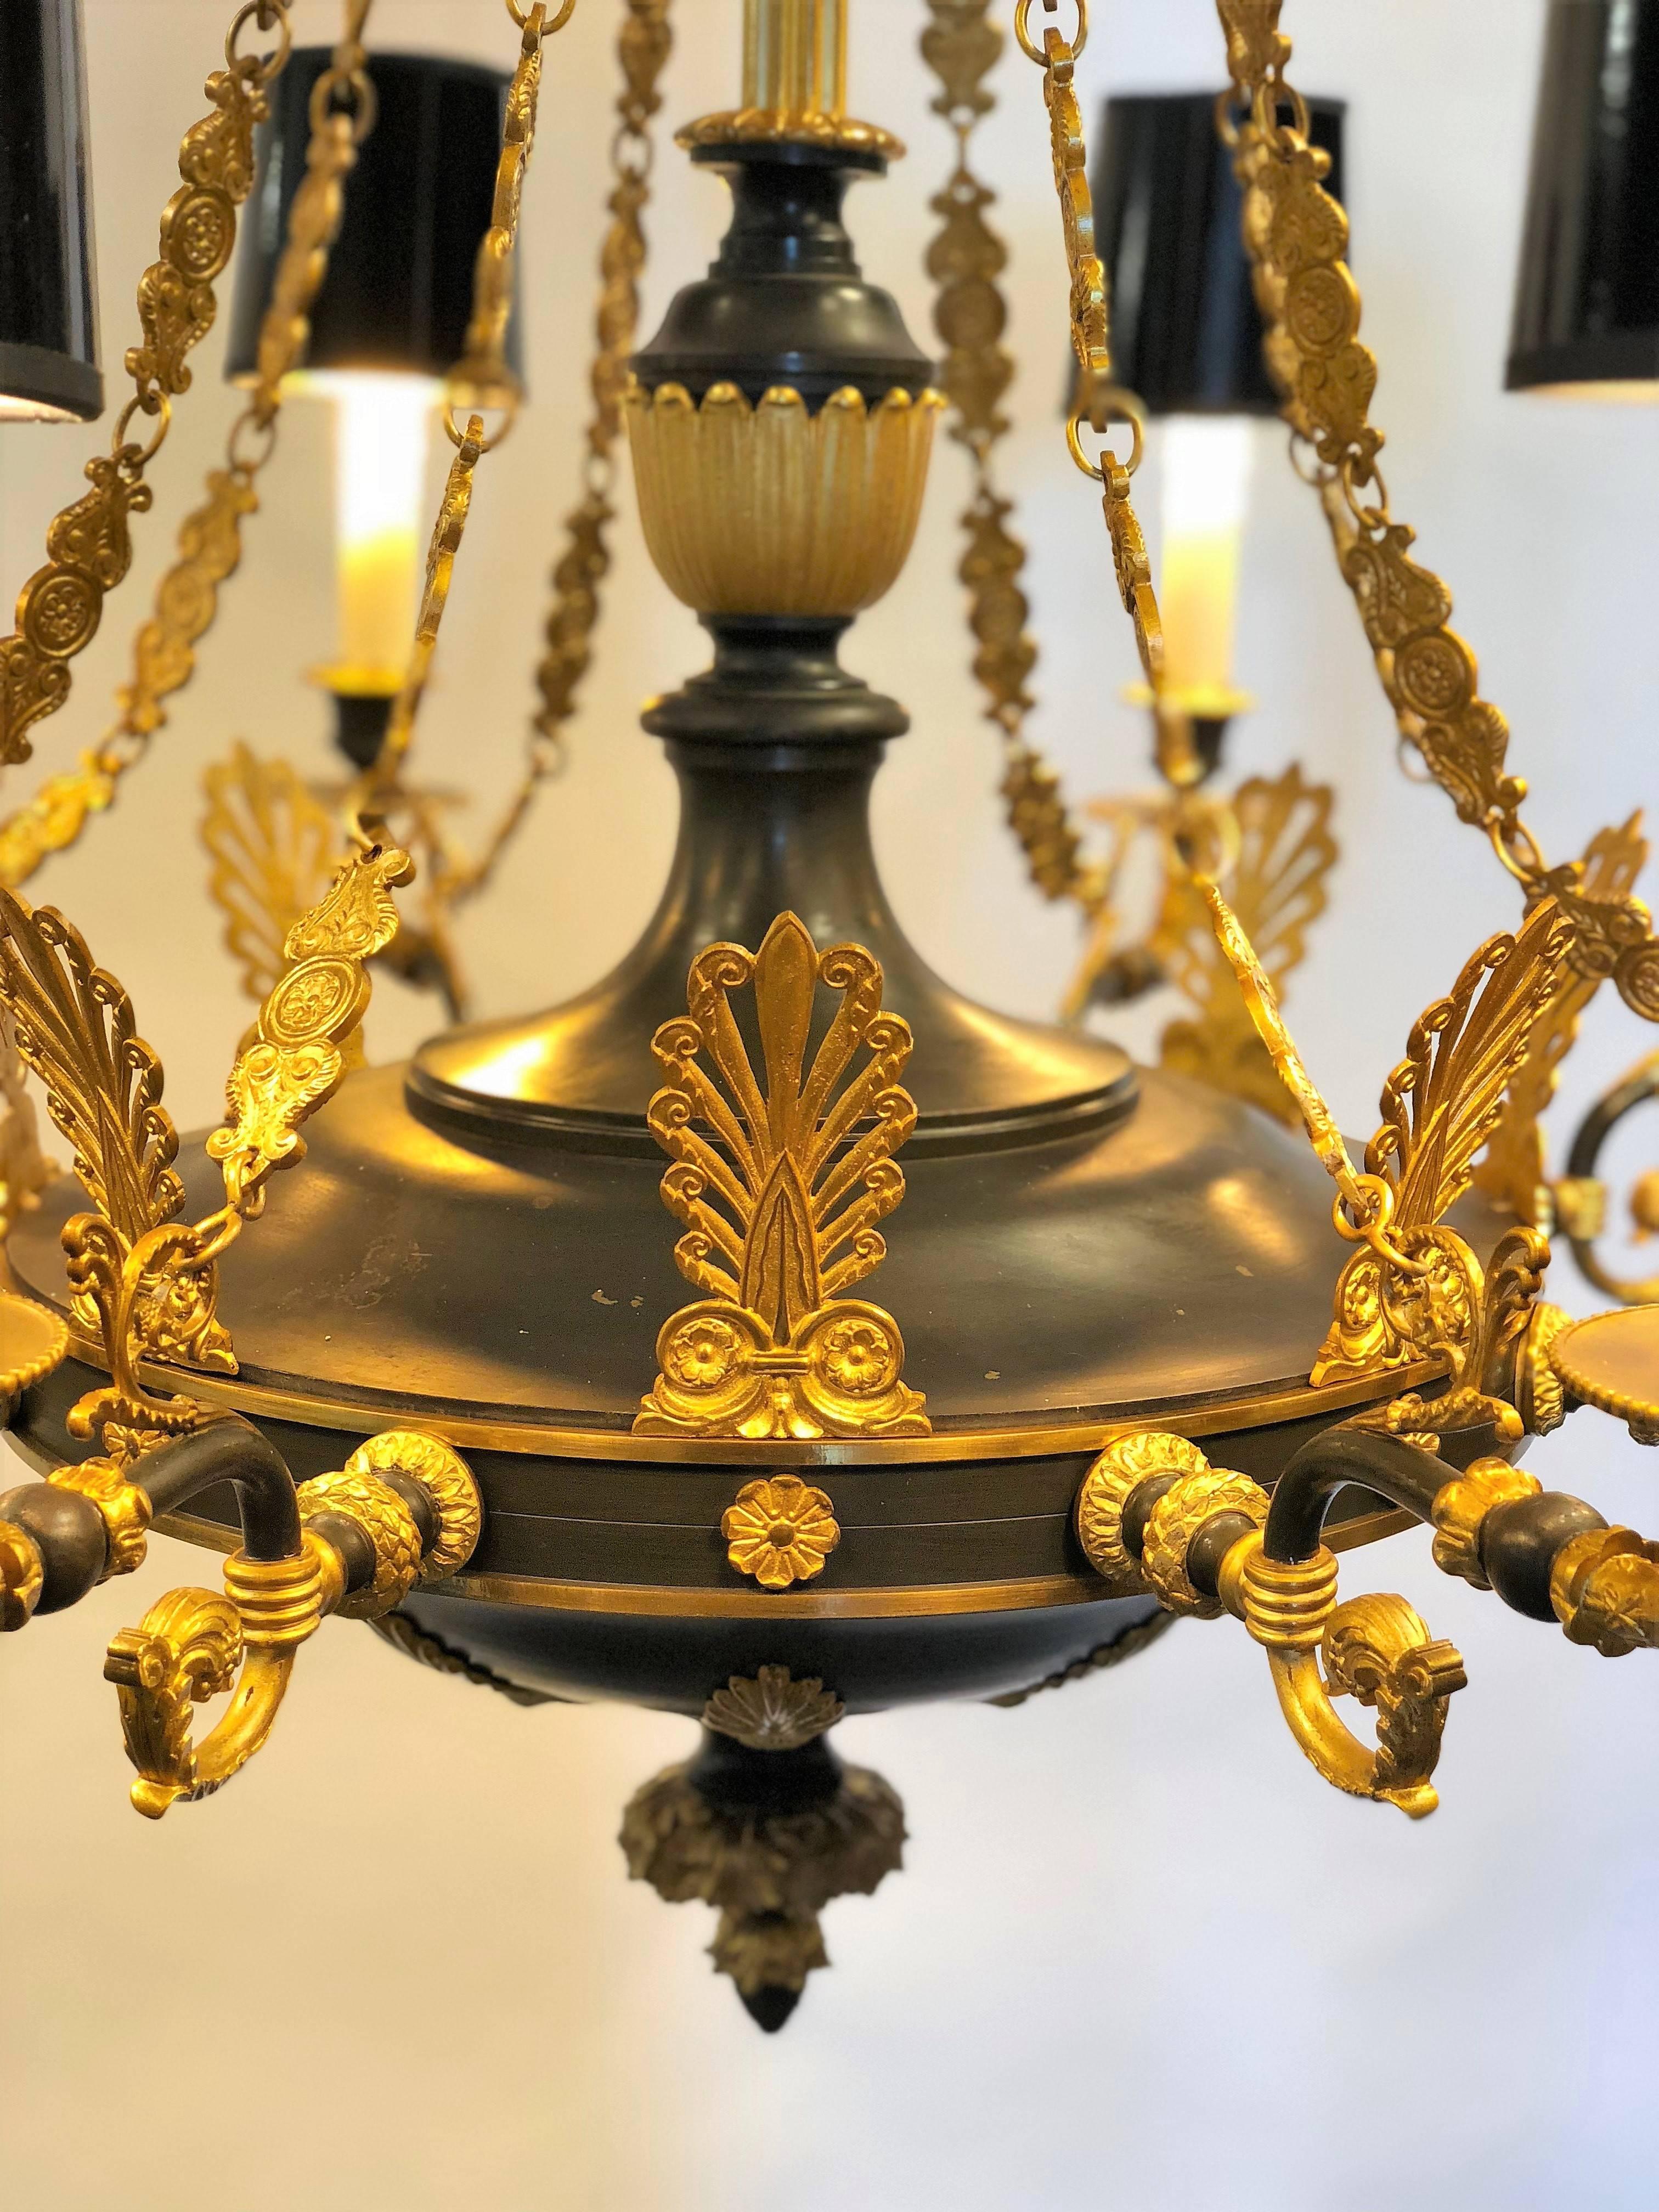 20th Century Neoclassical Empire French Gild and Patinated Chandelier In Good Condition For Sale In Heemskerk, Noord Holland